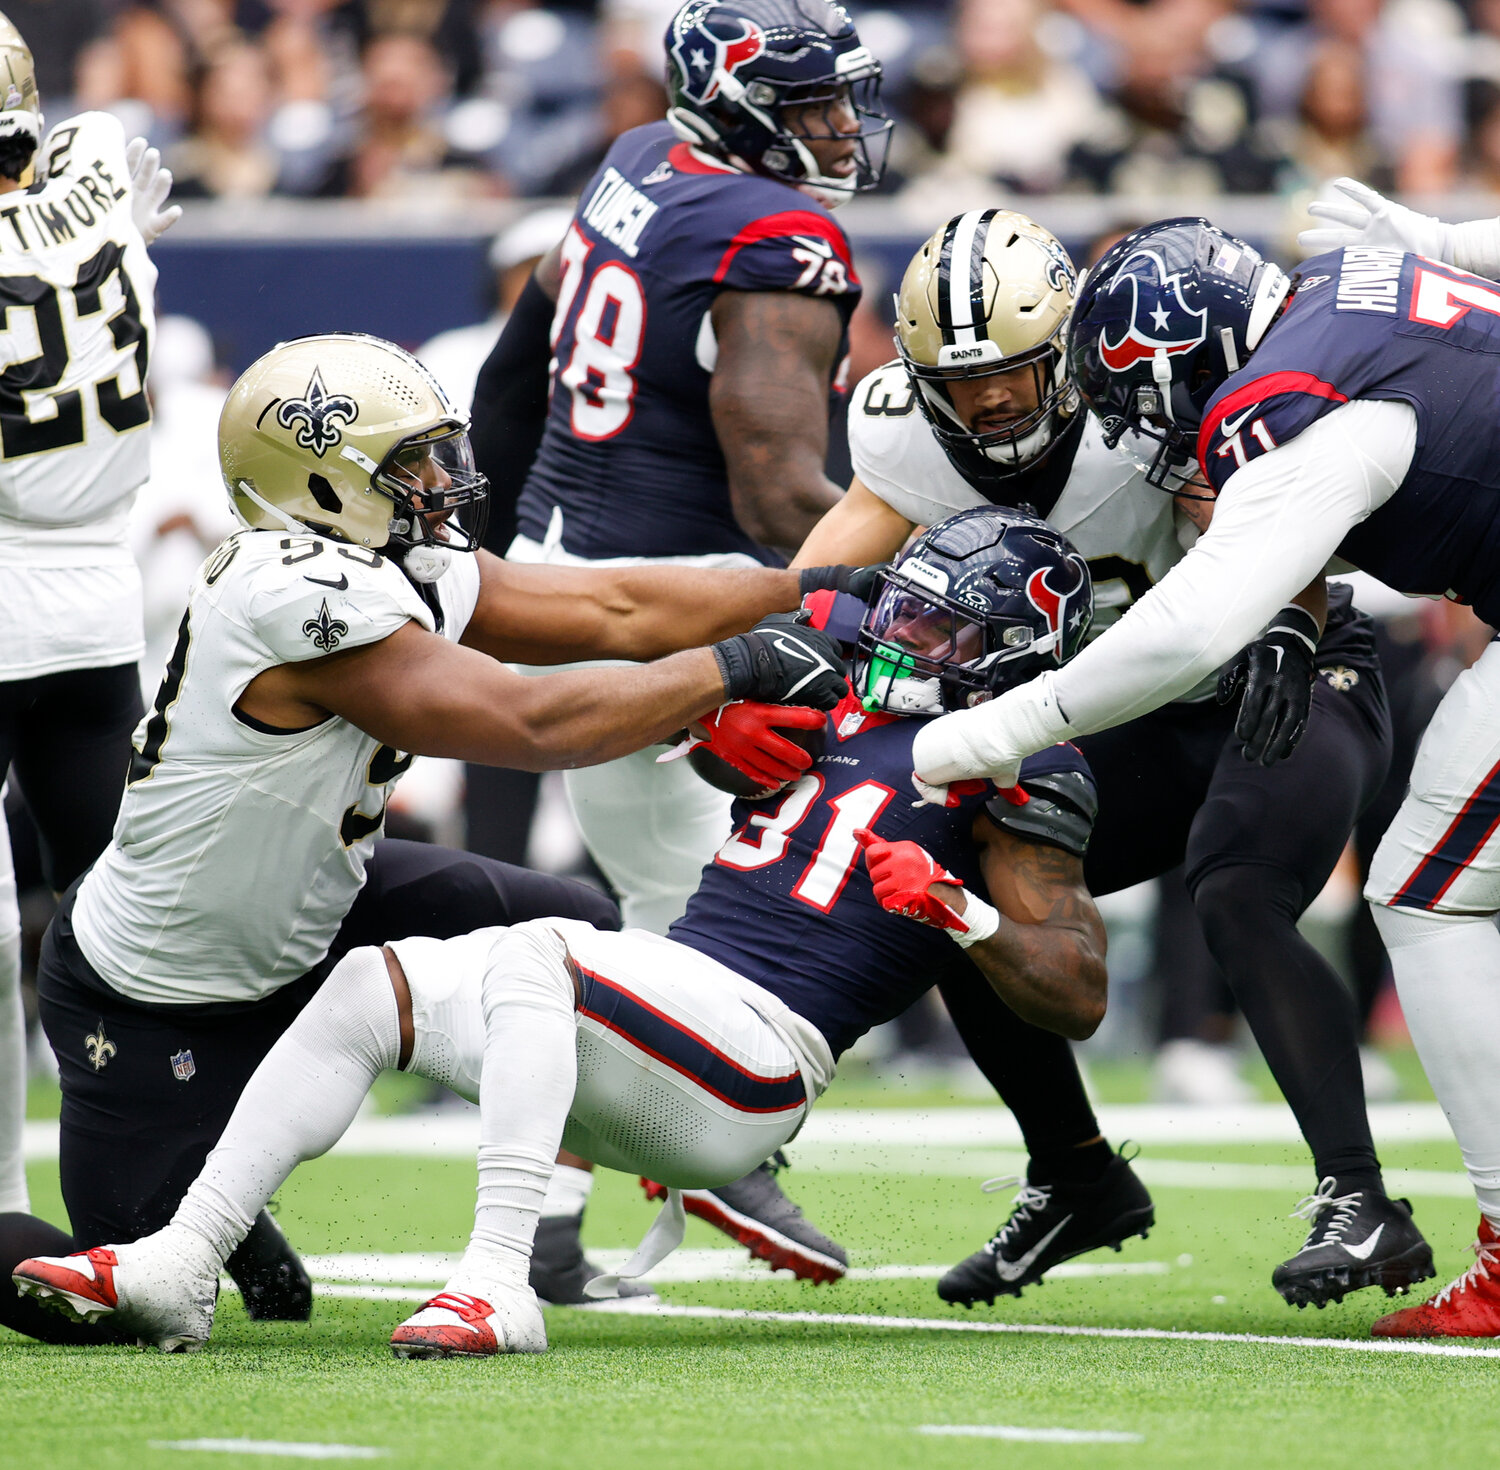 Saints defensive tackle Nathan Shepherd (93) grabs and pulls the ball as Texans running back Dameon Pierce (31) is tackled during an NFL game between the Texans and the Saints on October 15, 2023 in Houston. The Texans won, 20-13.